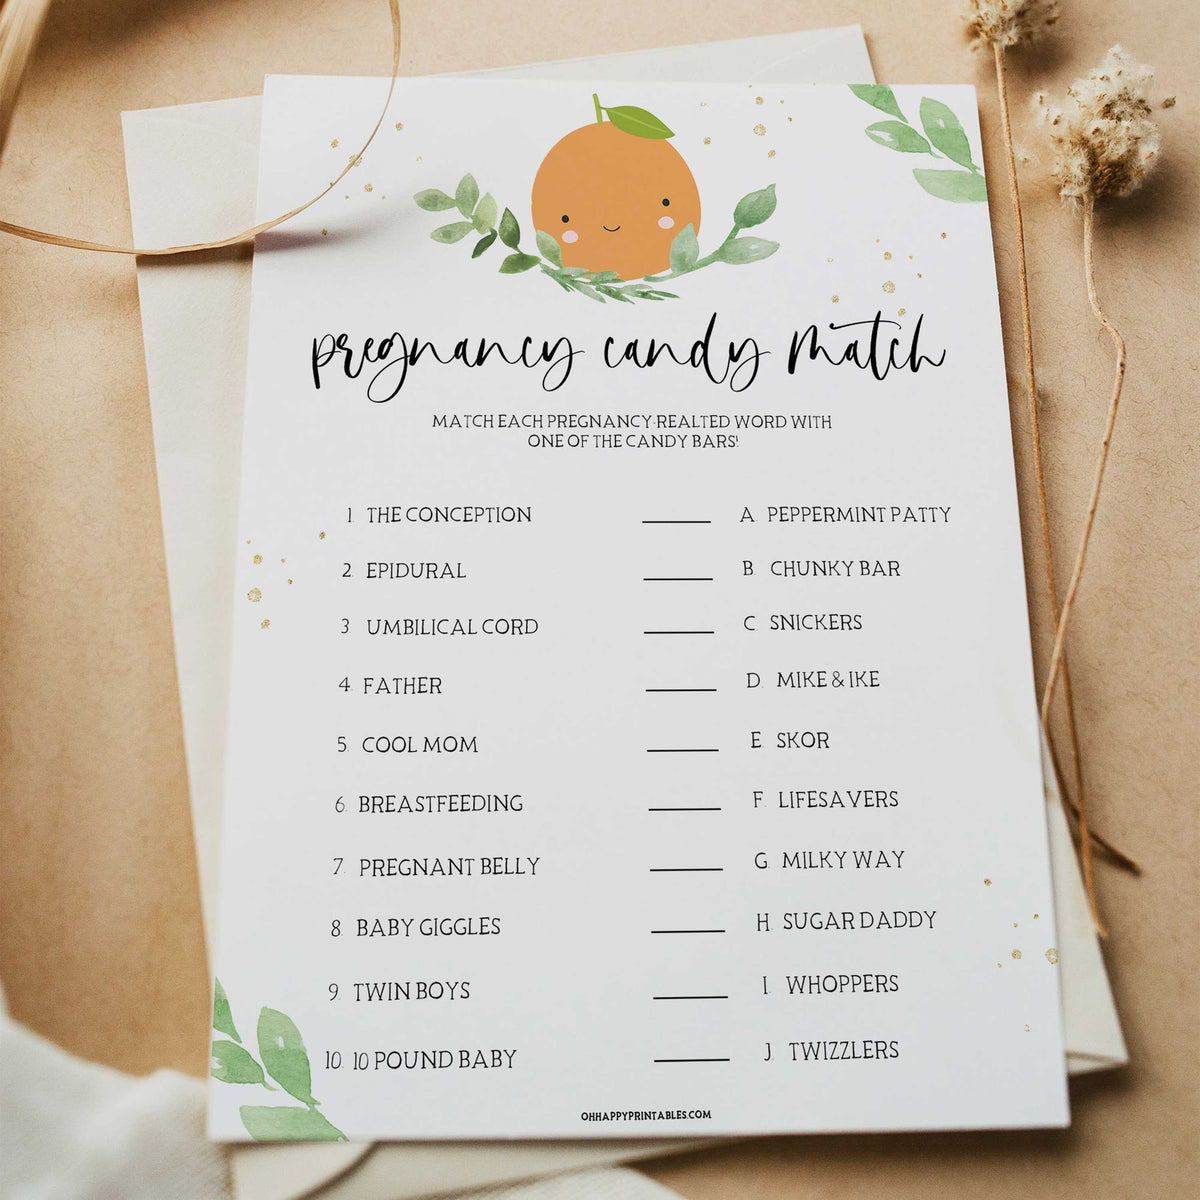 pregnancy candy match game, Printable baby shower games, little cutie baby games, baby shower games, fun baby shower ideas, top baby shower ideas, little cutie baby shower, baby shower games, fun little cutie baby shower ideas